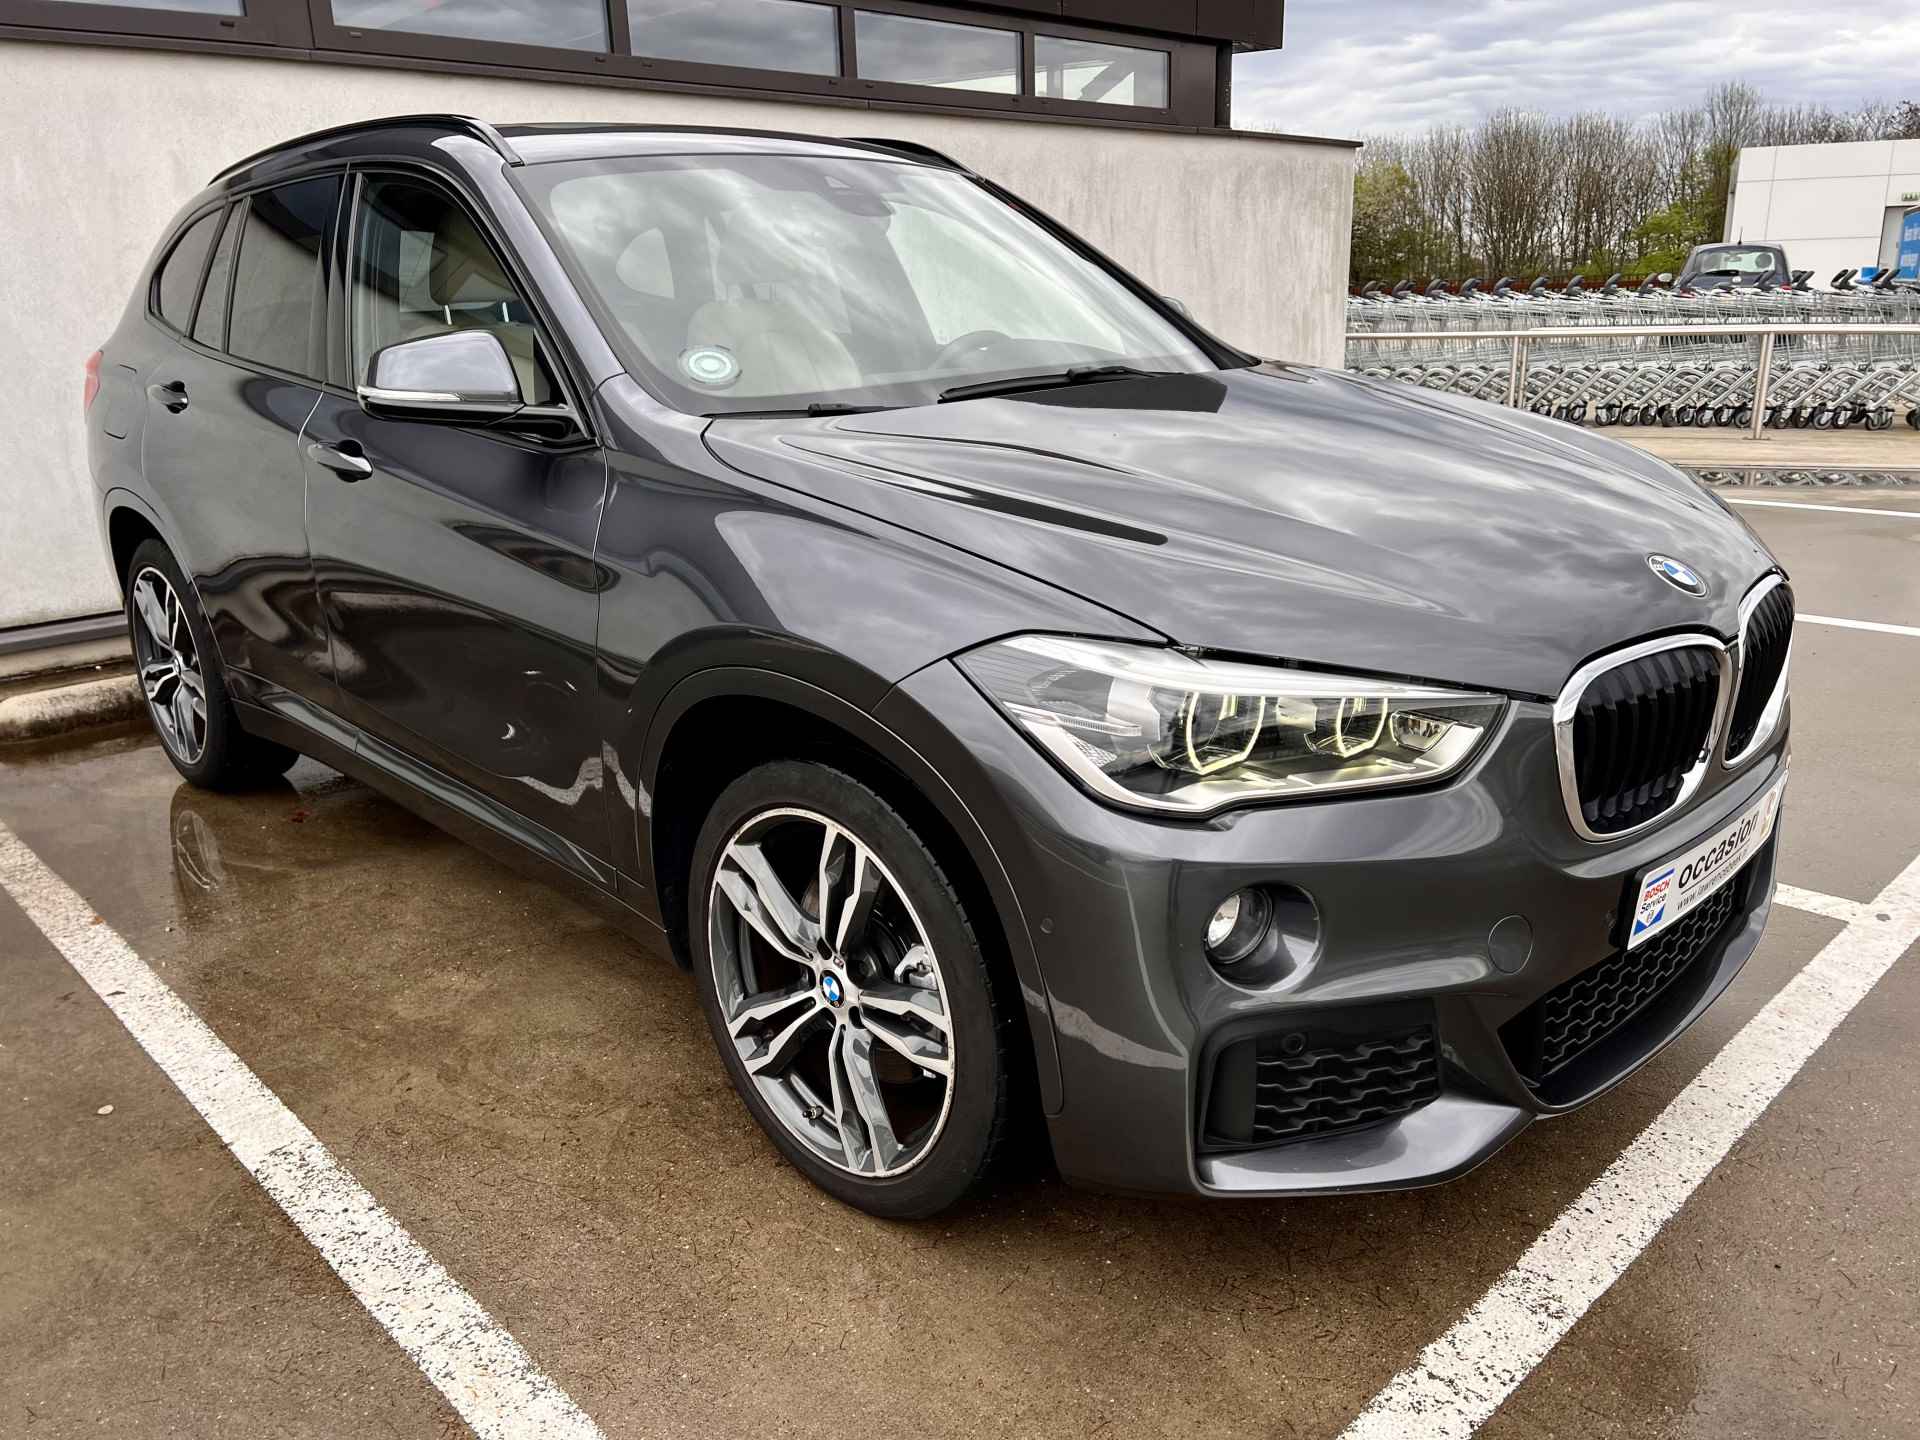 BMW X1 xDrive25i M Sport 231 PK | Leer | Pano |Head Up | Camera | % Bovag Occasion Partner % - 13/48